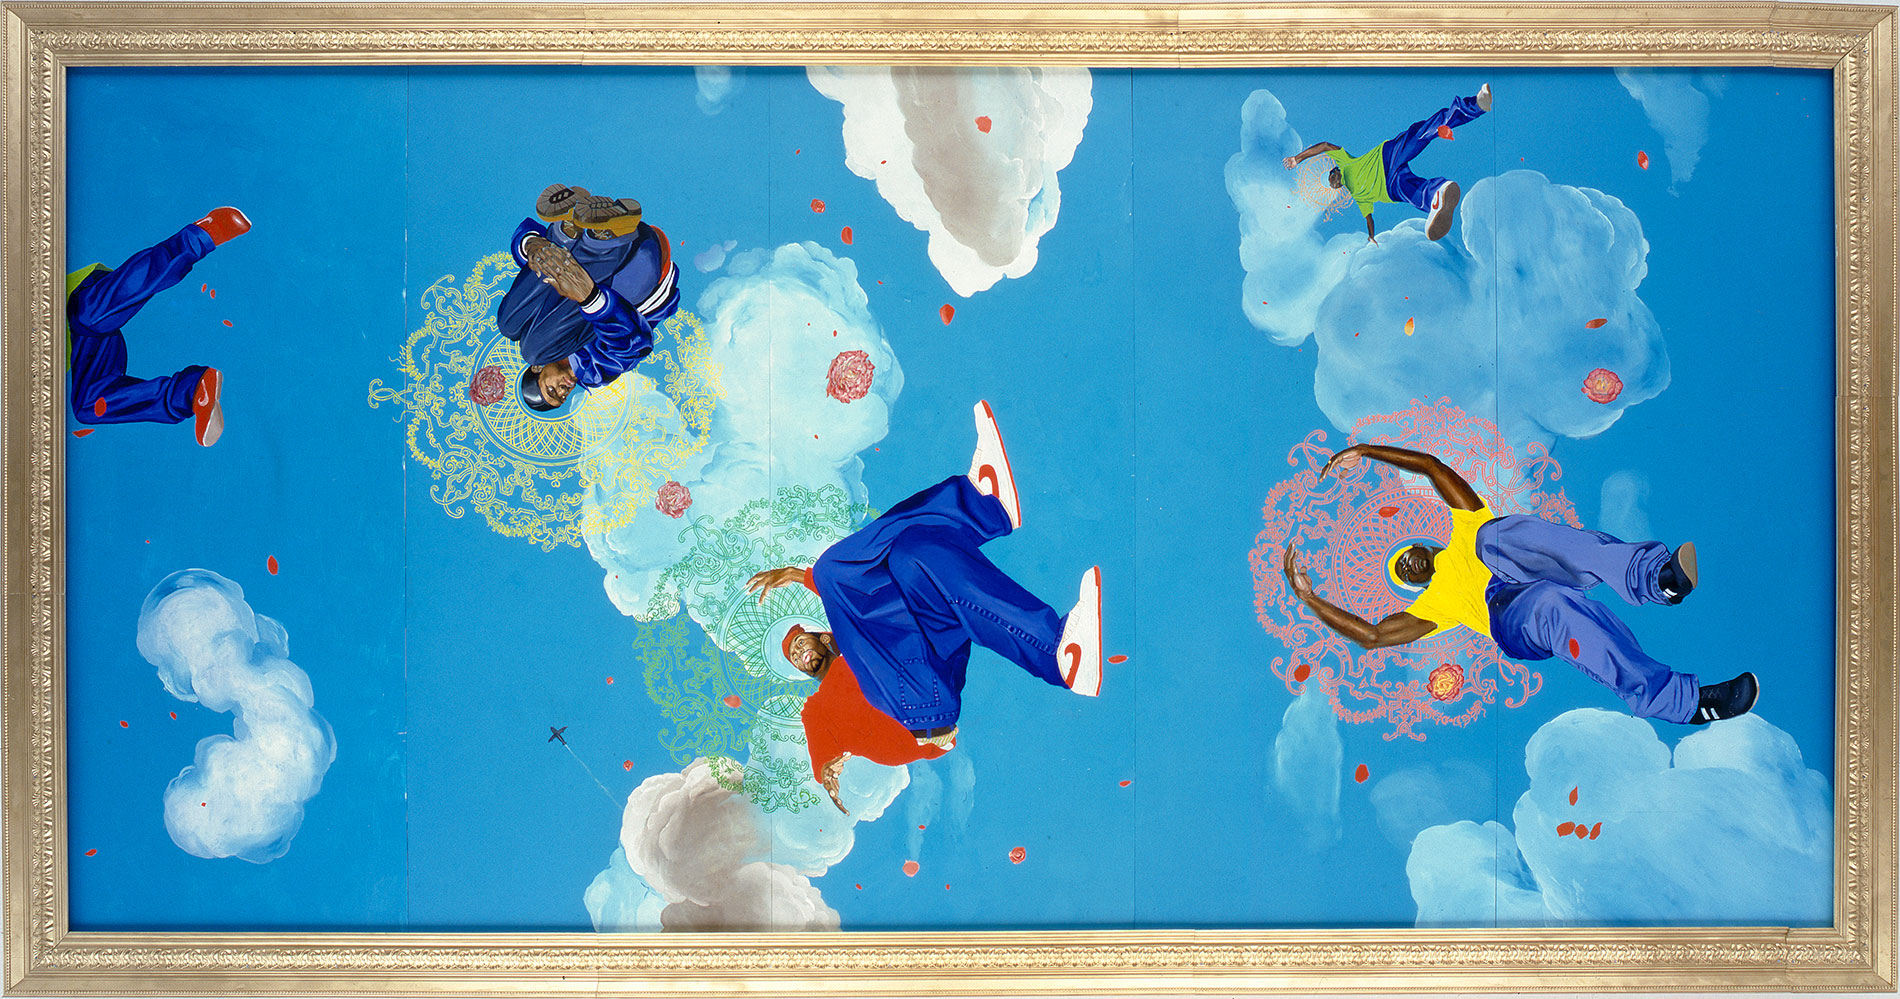 Kehinde Wiley | Passing / Posing  | GO (Ceiling Painting), 2003 Oil on Panel. | 6